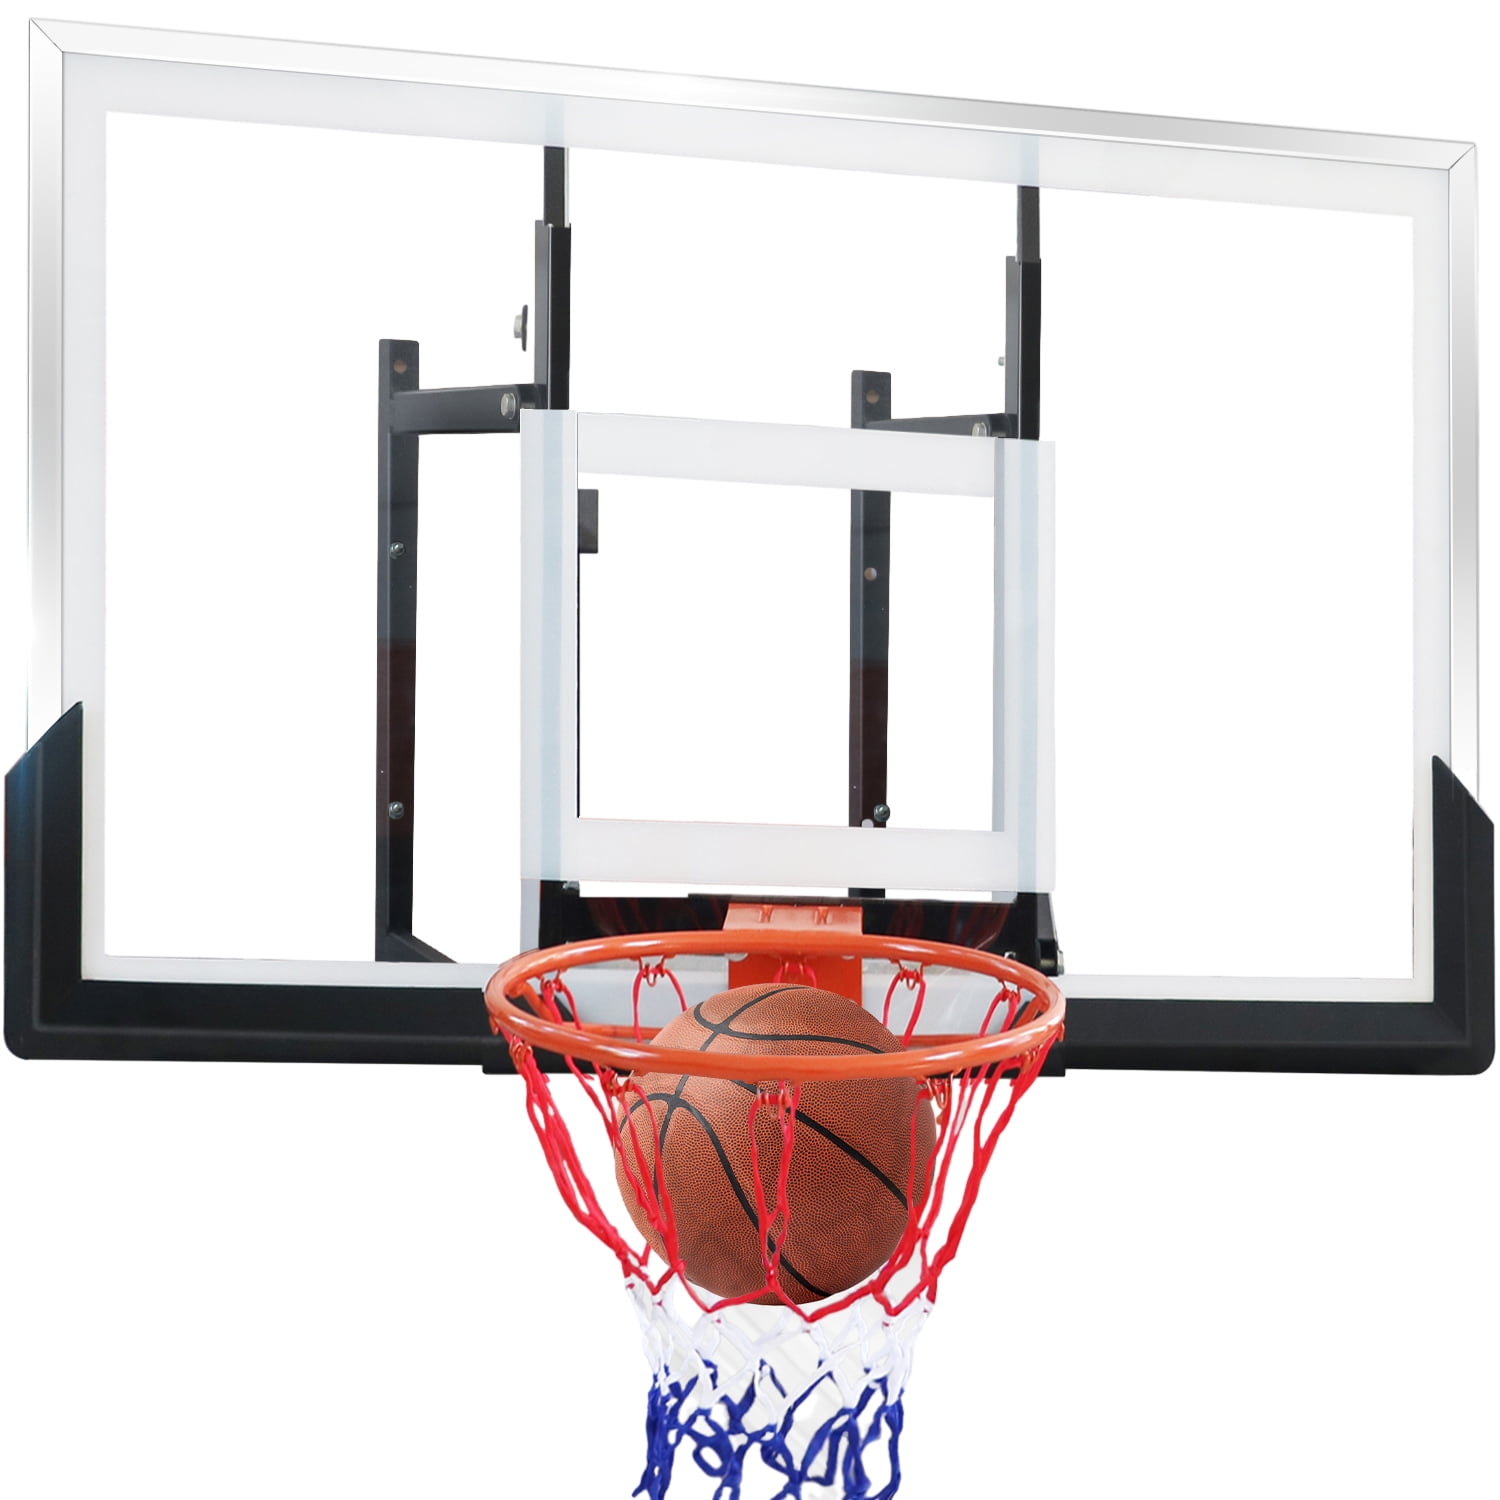 and White, Frame with Adults, Hoop Rim, Summer Set Pools, Inflatable Waves included, Basketball Basketball Unisex Basketball for Backboard for